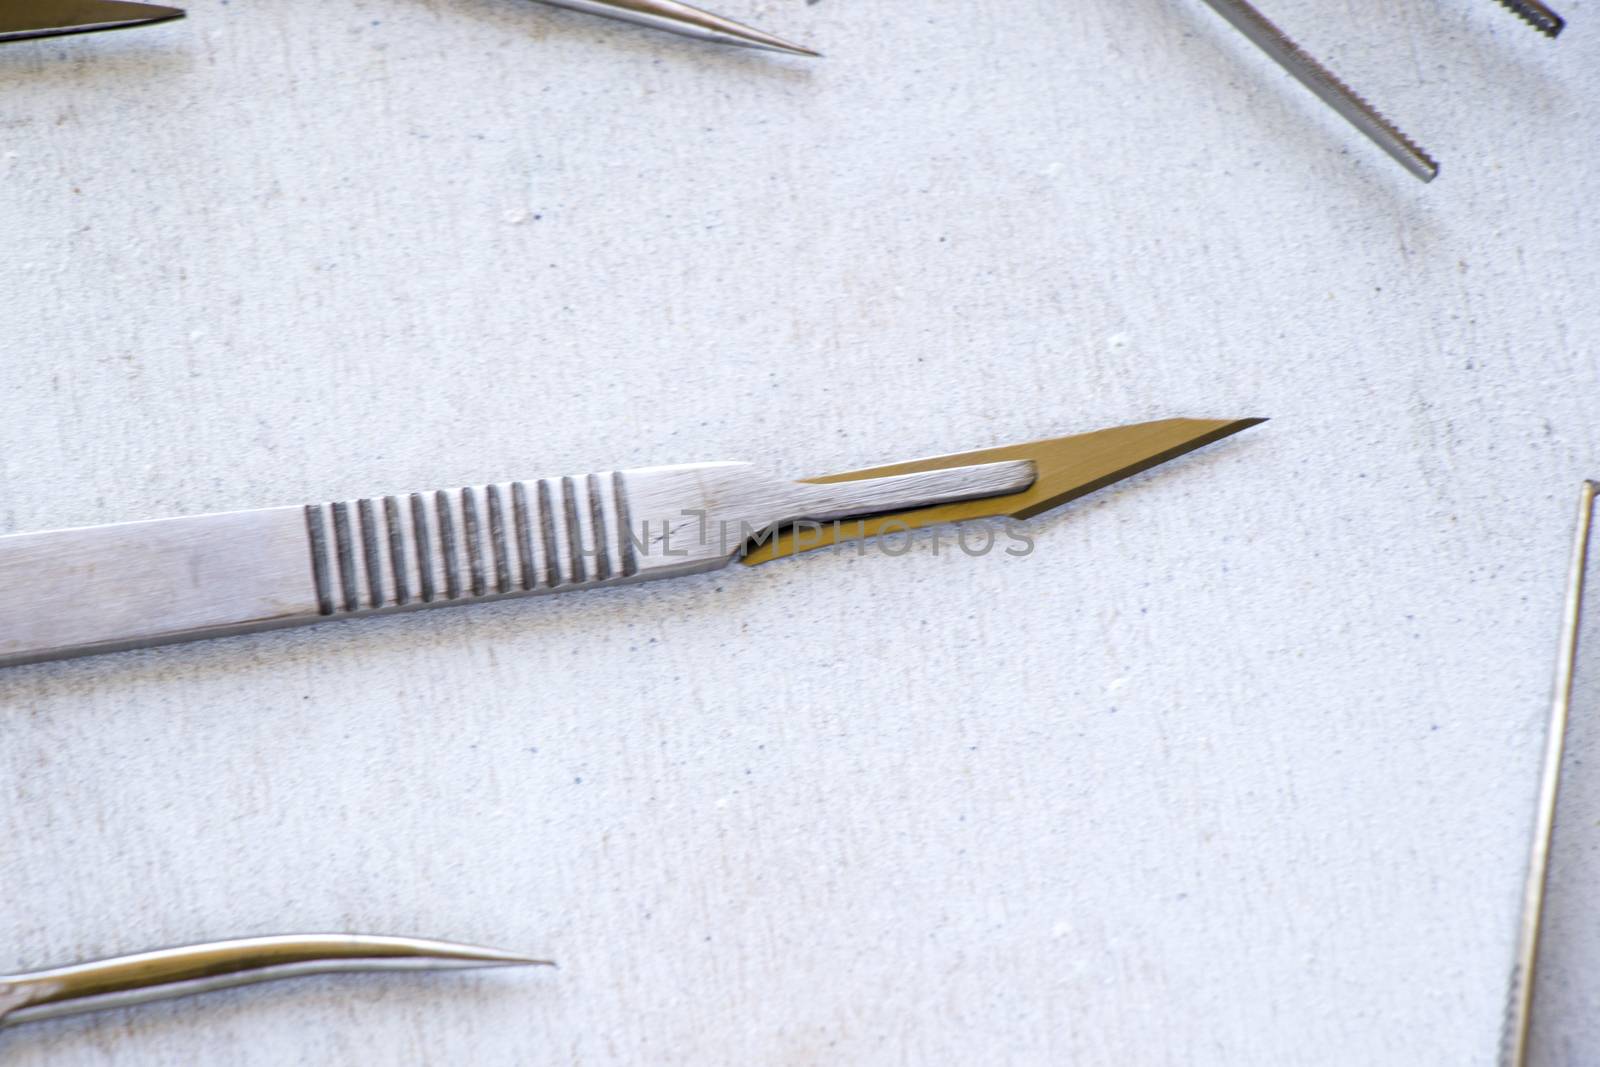 Surgery blade on the sterile table, scalpel by Taidundua